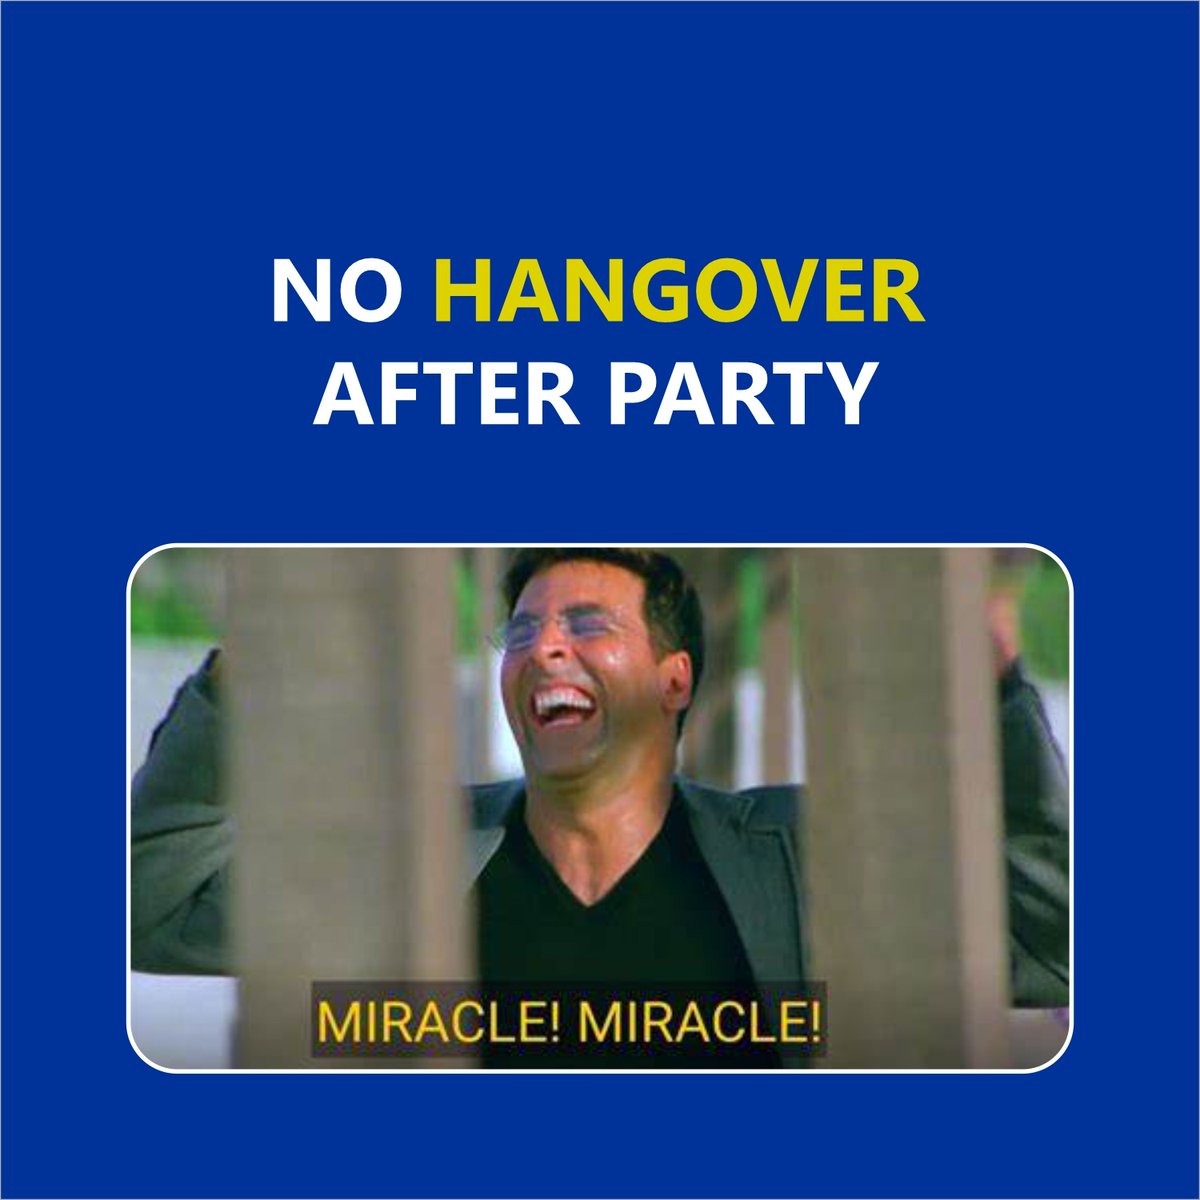 Ever imagined mornings without a hangover?

𝐂𝐥𝐢𝐜𝐤 𝐭𝐨 𝐛𝐮𝐲: ayuvedaherbs.com/shop/capsules/…

#ayuvedaherbs #indswiftltd #hangoverrelief #hangovercure #antihangover #hangoverpills #hangovercapsule #ayurvedichangoverpills #partysmart #nomorehangovers #hangoverfree #drinksmart